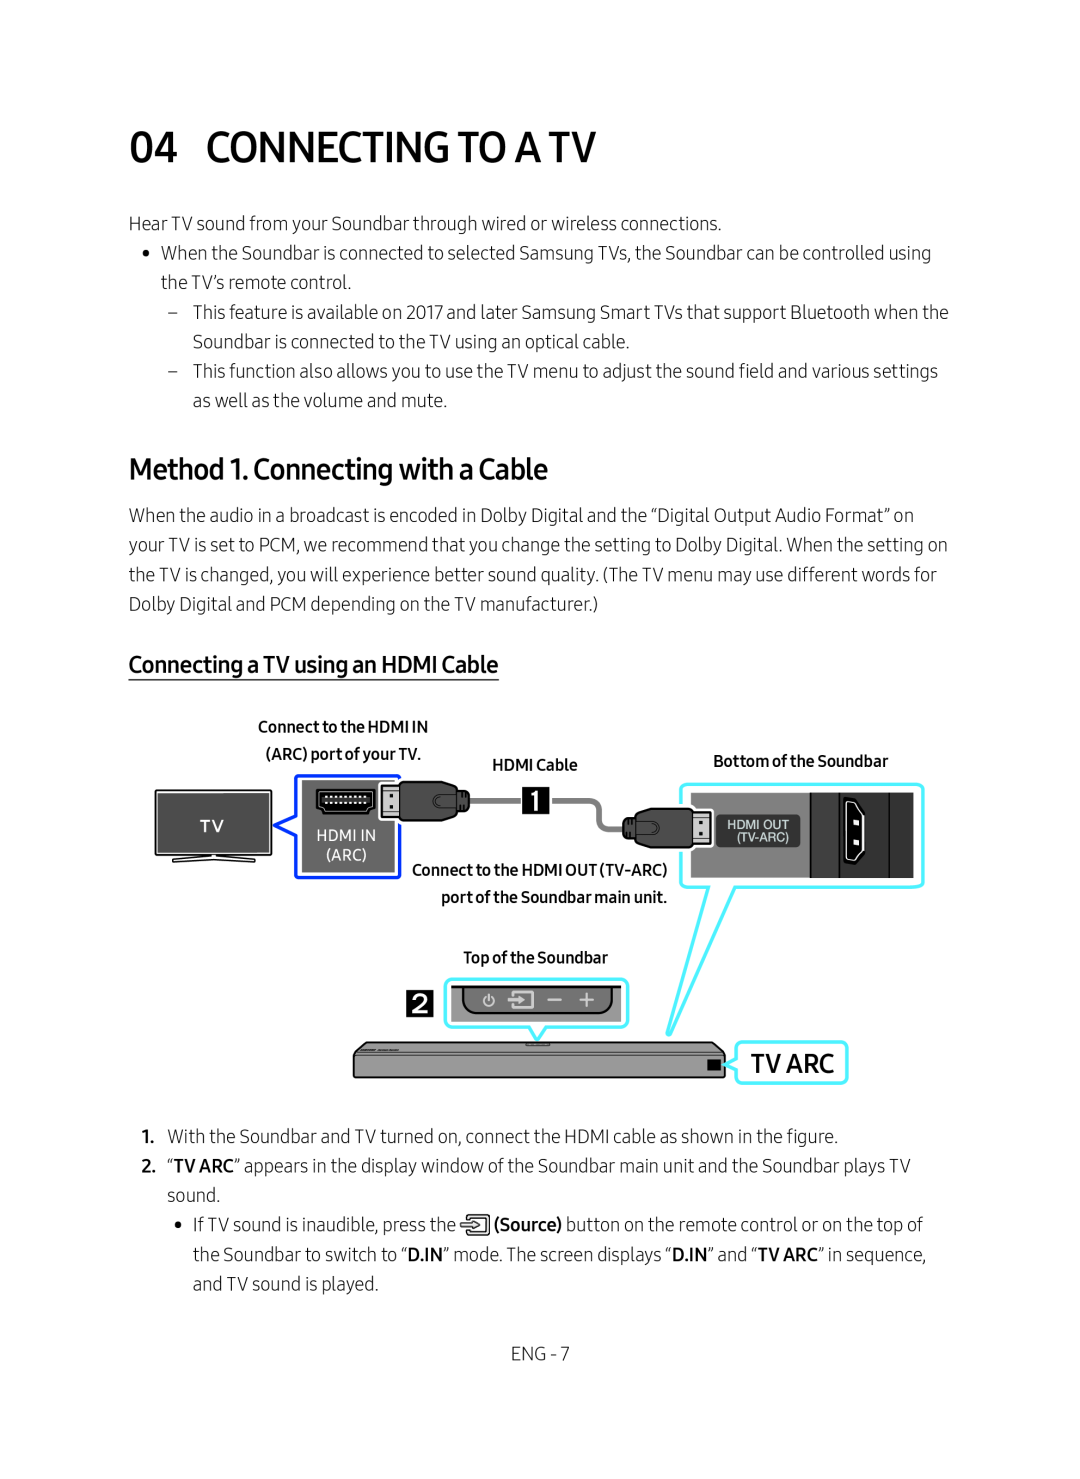 Connecting a TV using an HDMI Cable Method 1. Connecting with a Cable